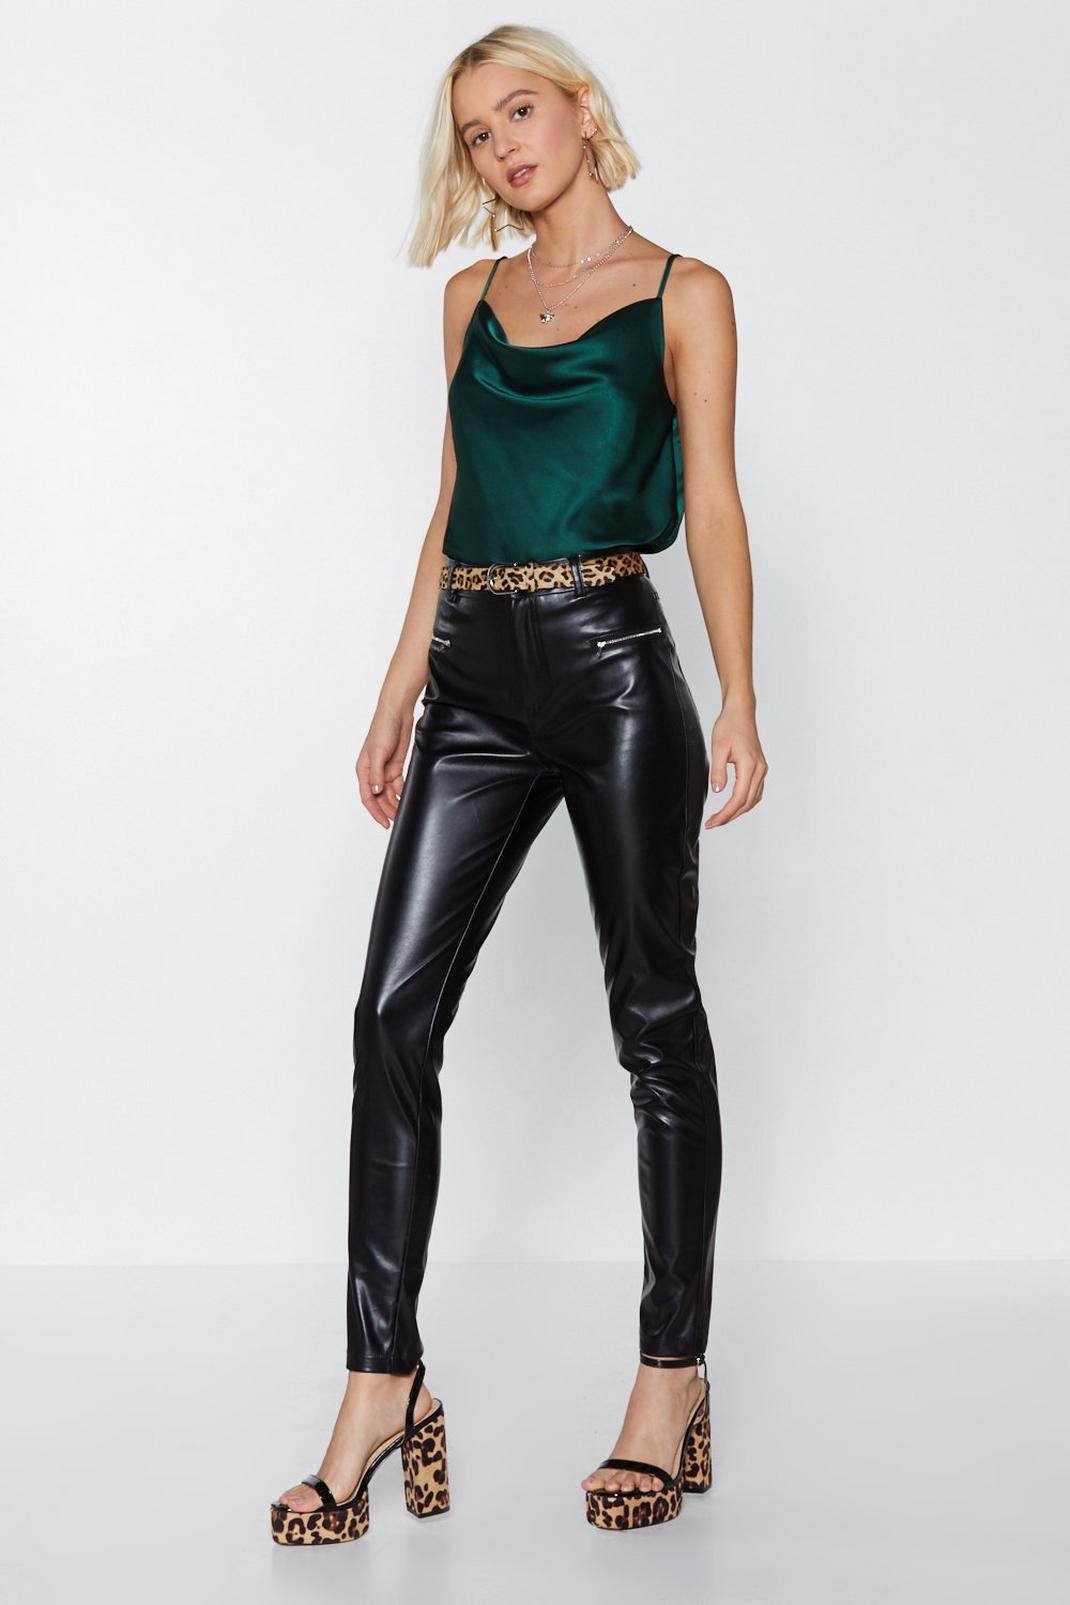 000280542 2 - new nylon finds - Gallery  Leather pants women, Shiny  clothes, Nylon pants